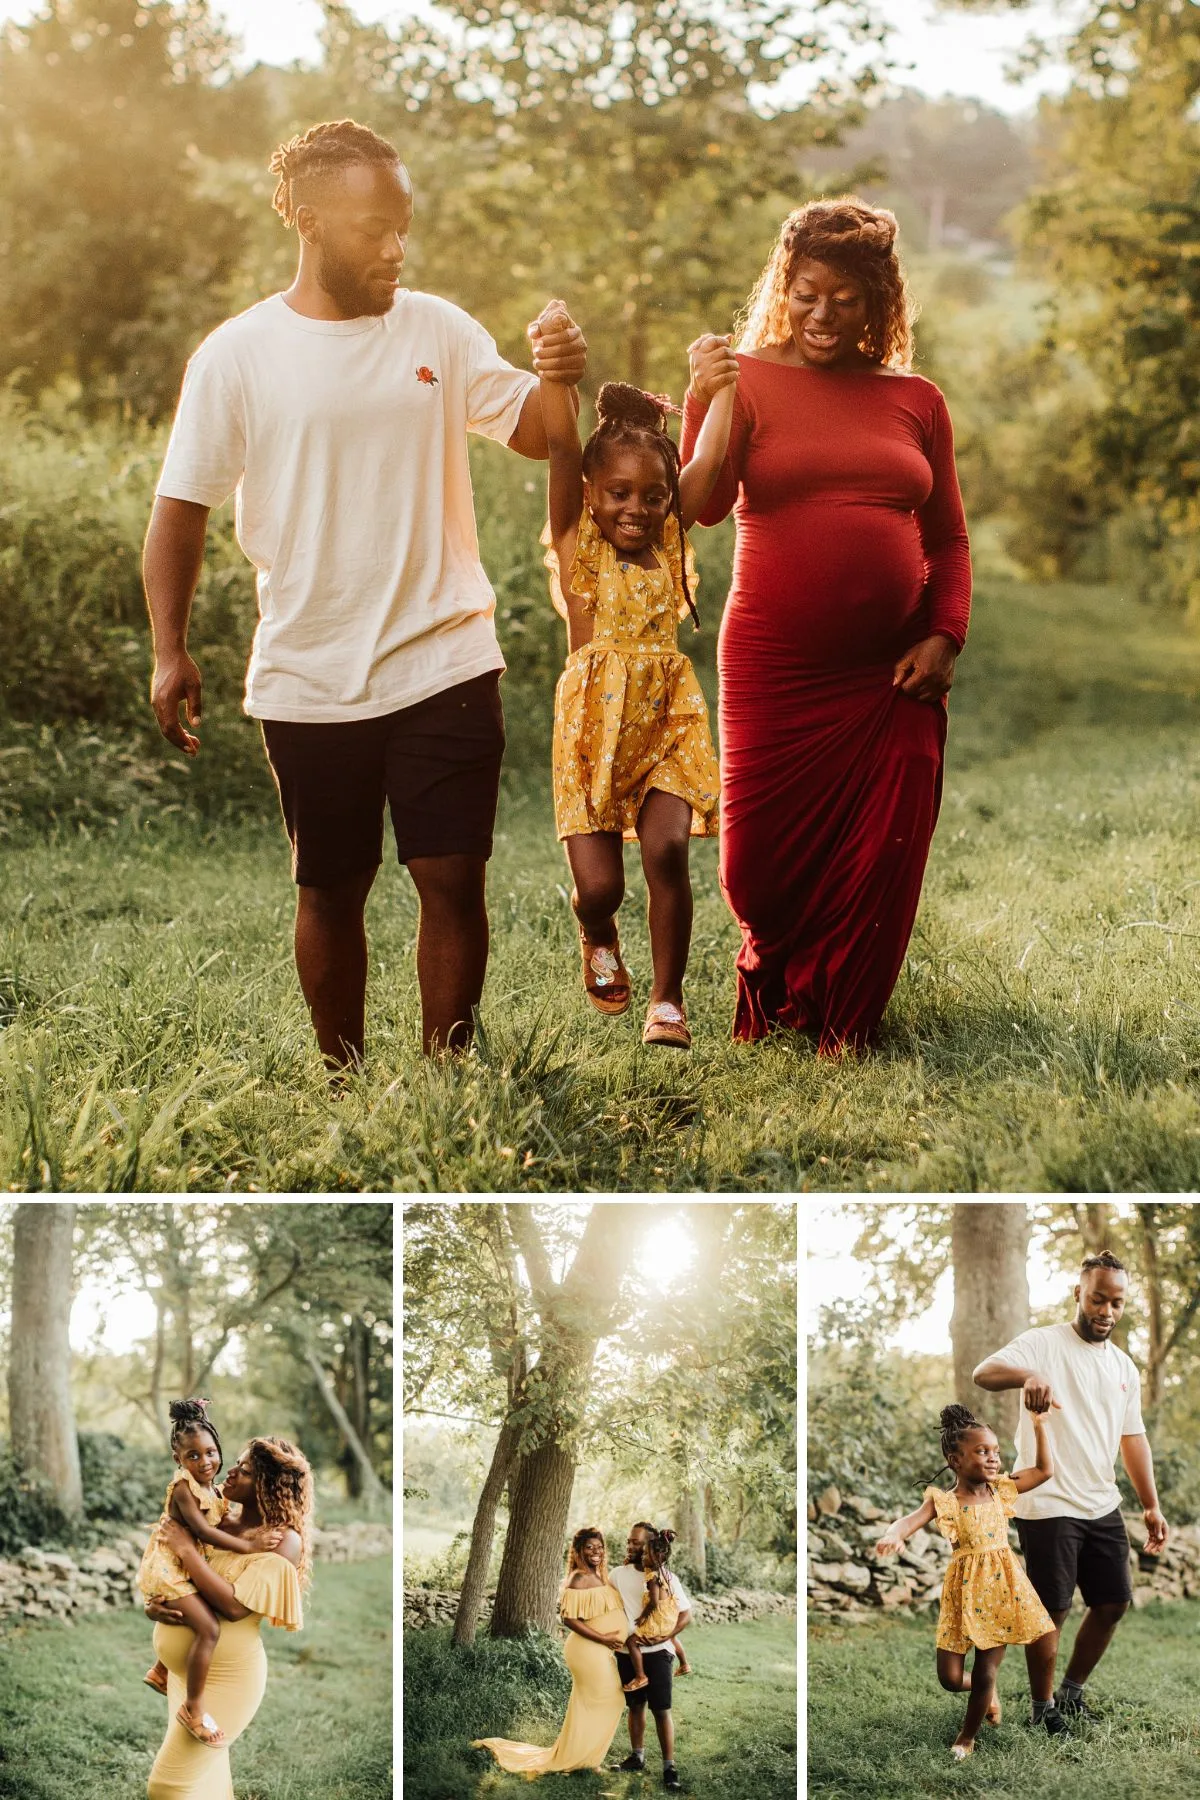 Collage of family photos with a father, mother, and daughter in an outdoor setting.